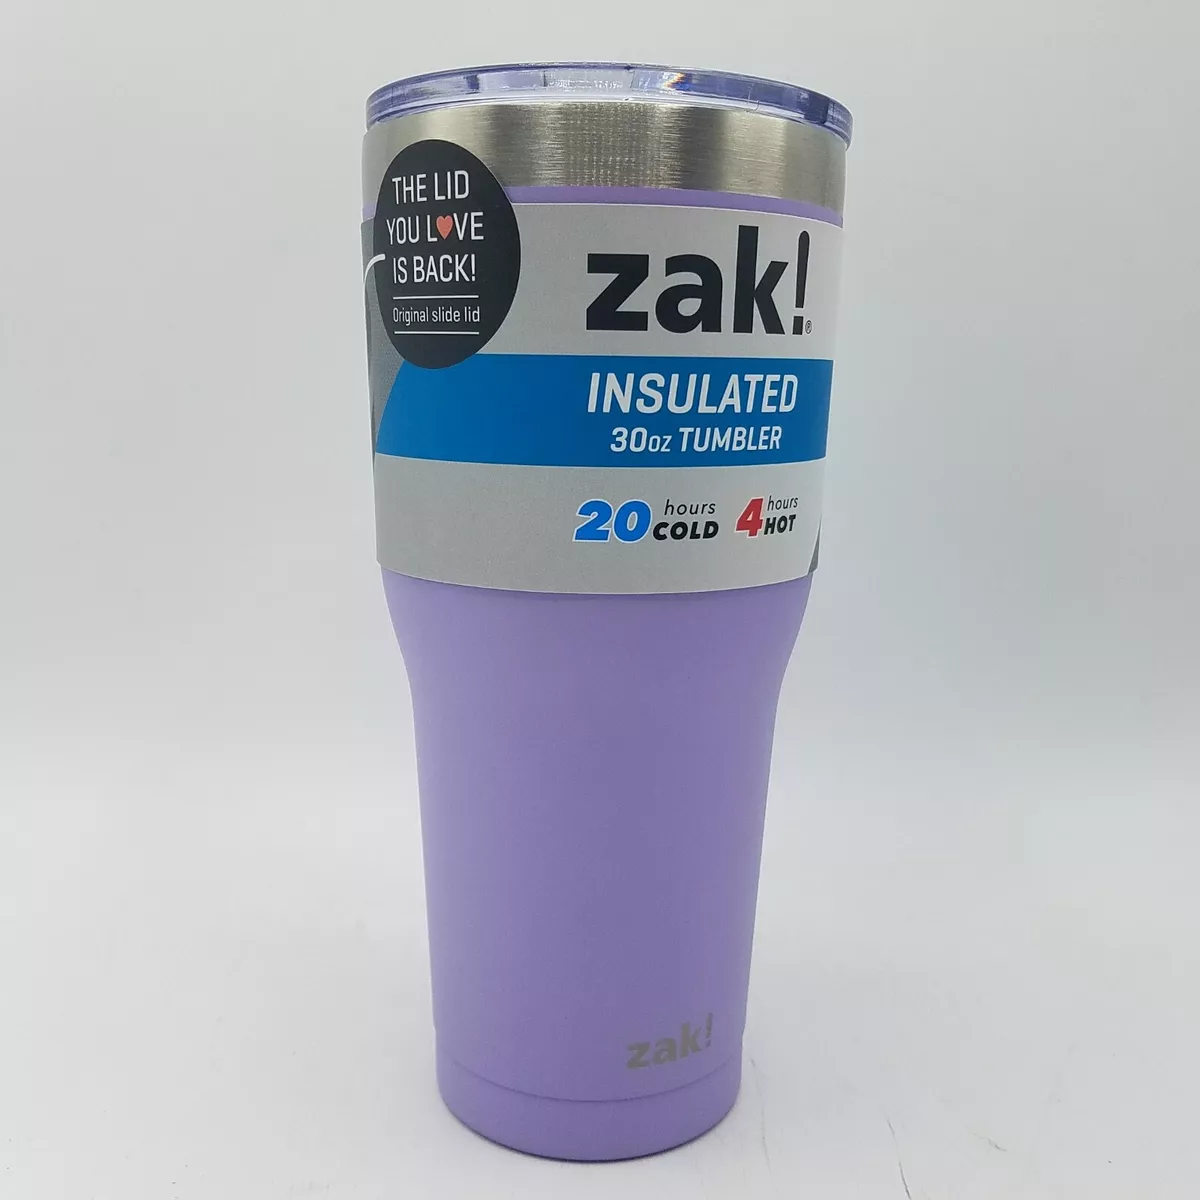 Zak! Designs Stainless Steel Double Walled Wacuum Seal Waverly Tumbler -  Wisteria Purple, 1 ct - Fry's Food Stores